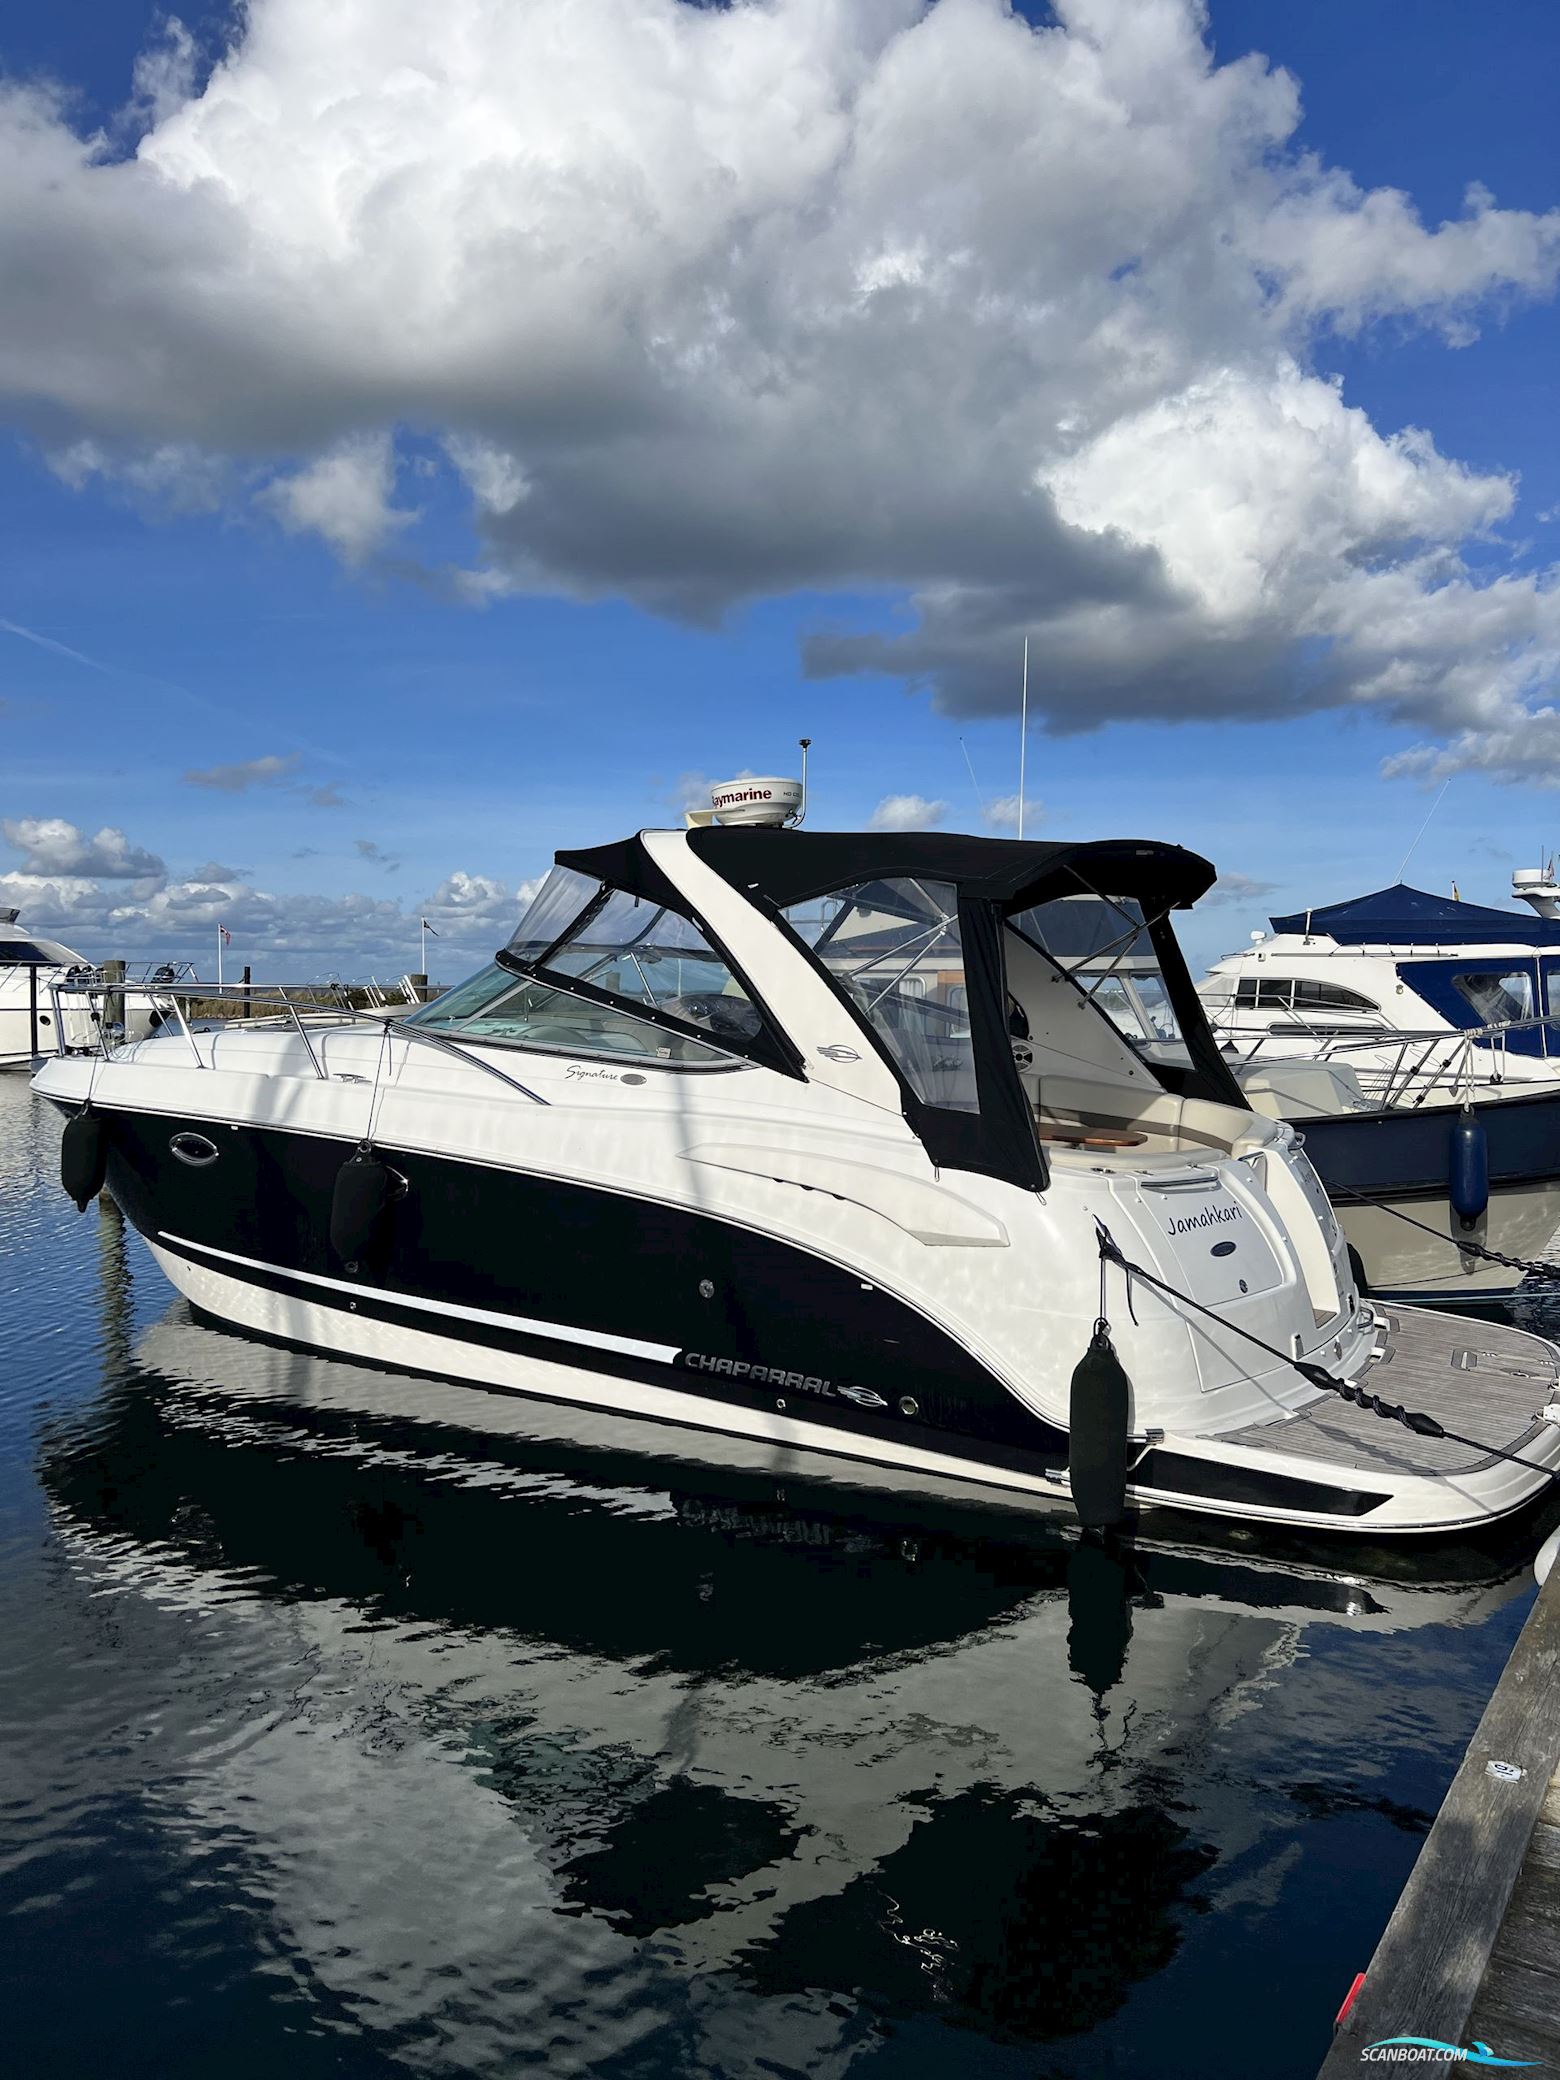 Chaparral 330 Signature Motor boat 2008, with Volvo Penta D4 260 A-B engine, Denmark